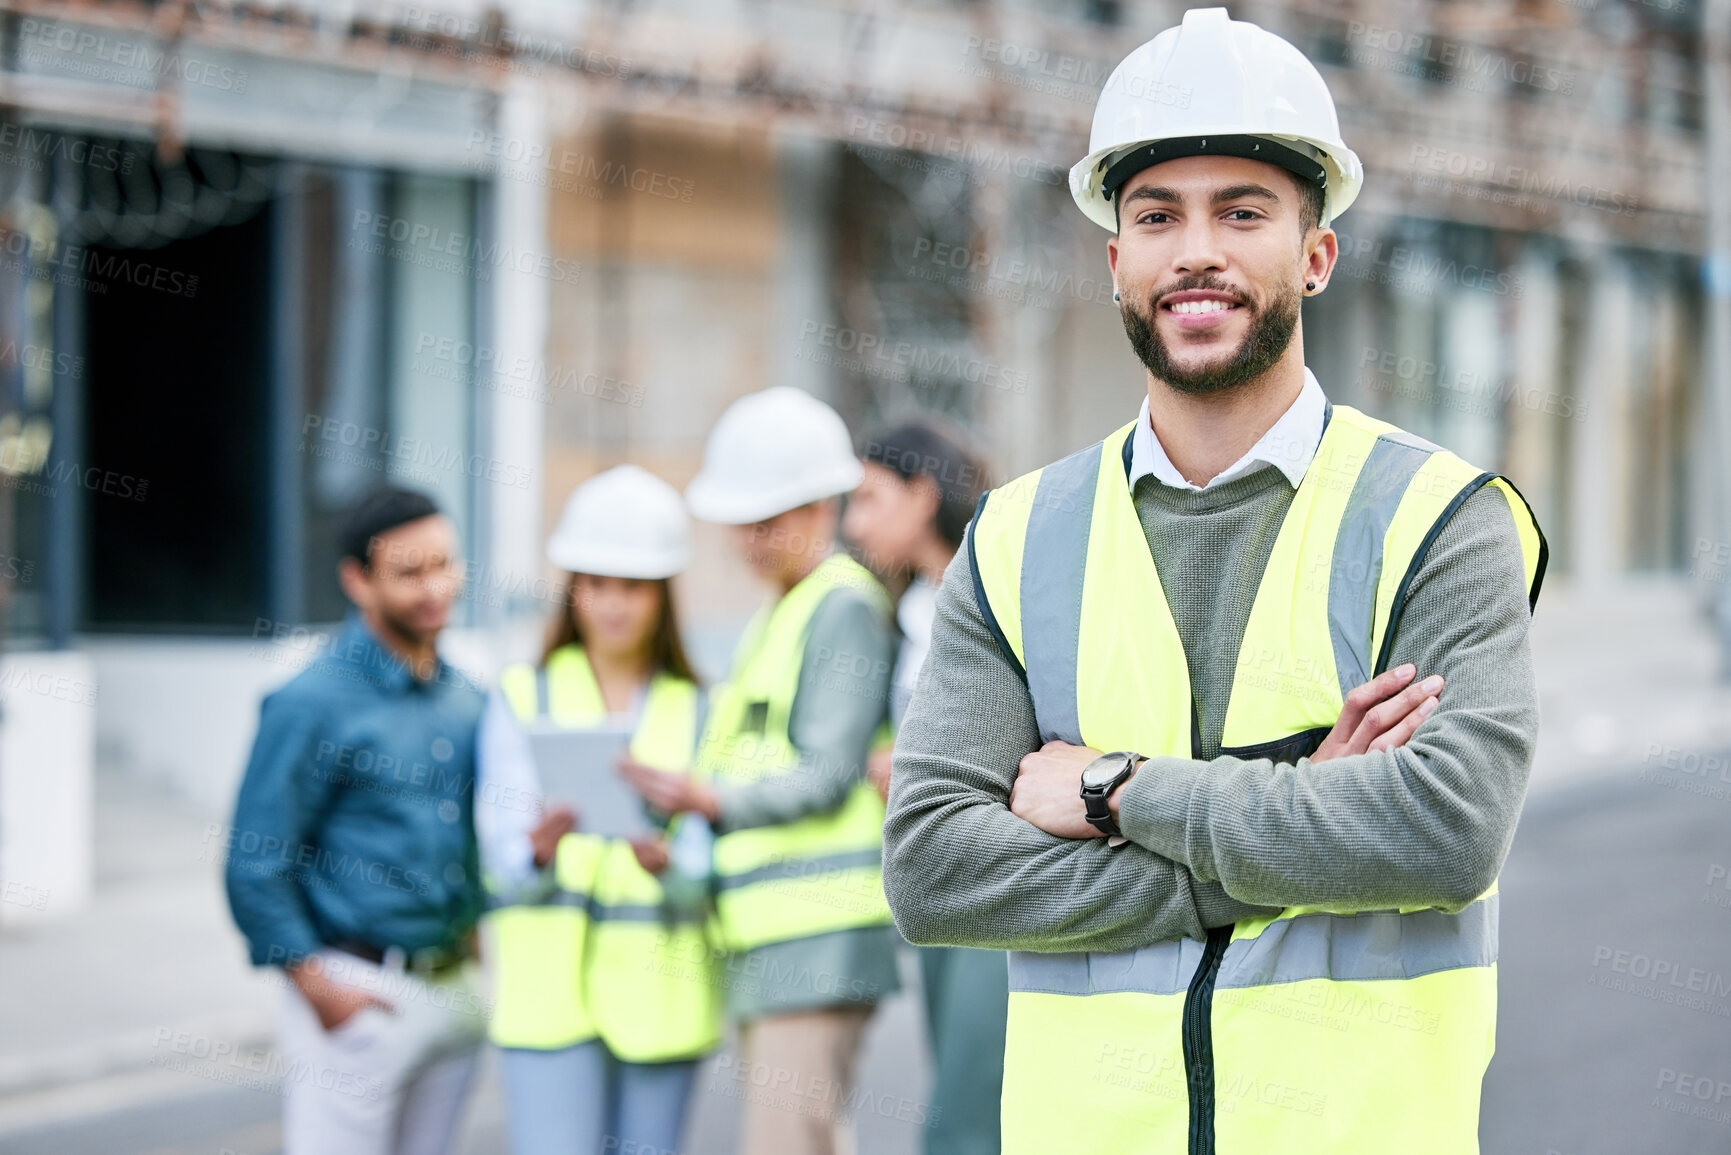 Buy stock photo Shot of a handsome male construction worker standing with his arms folded outside